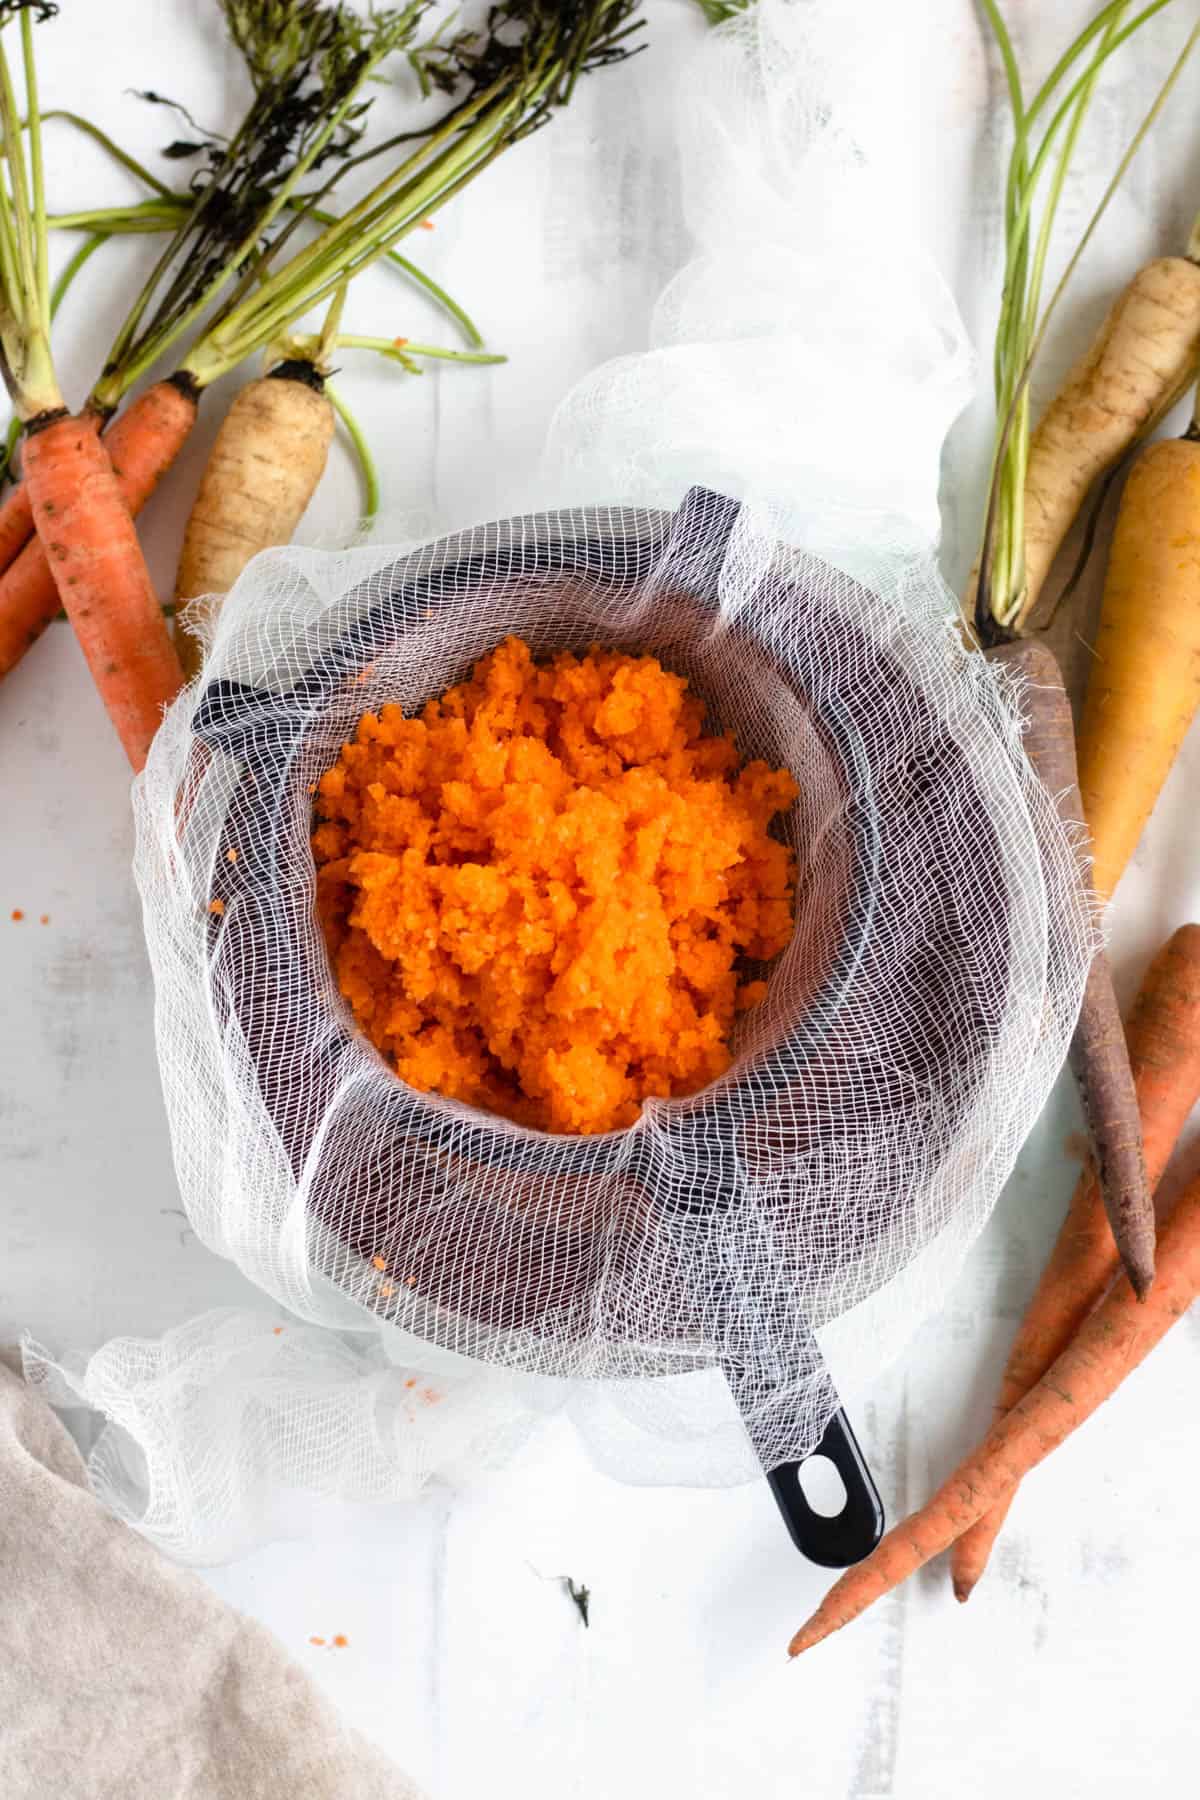 carrot juice being strained through a cheesecloth with a light colored background